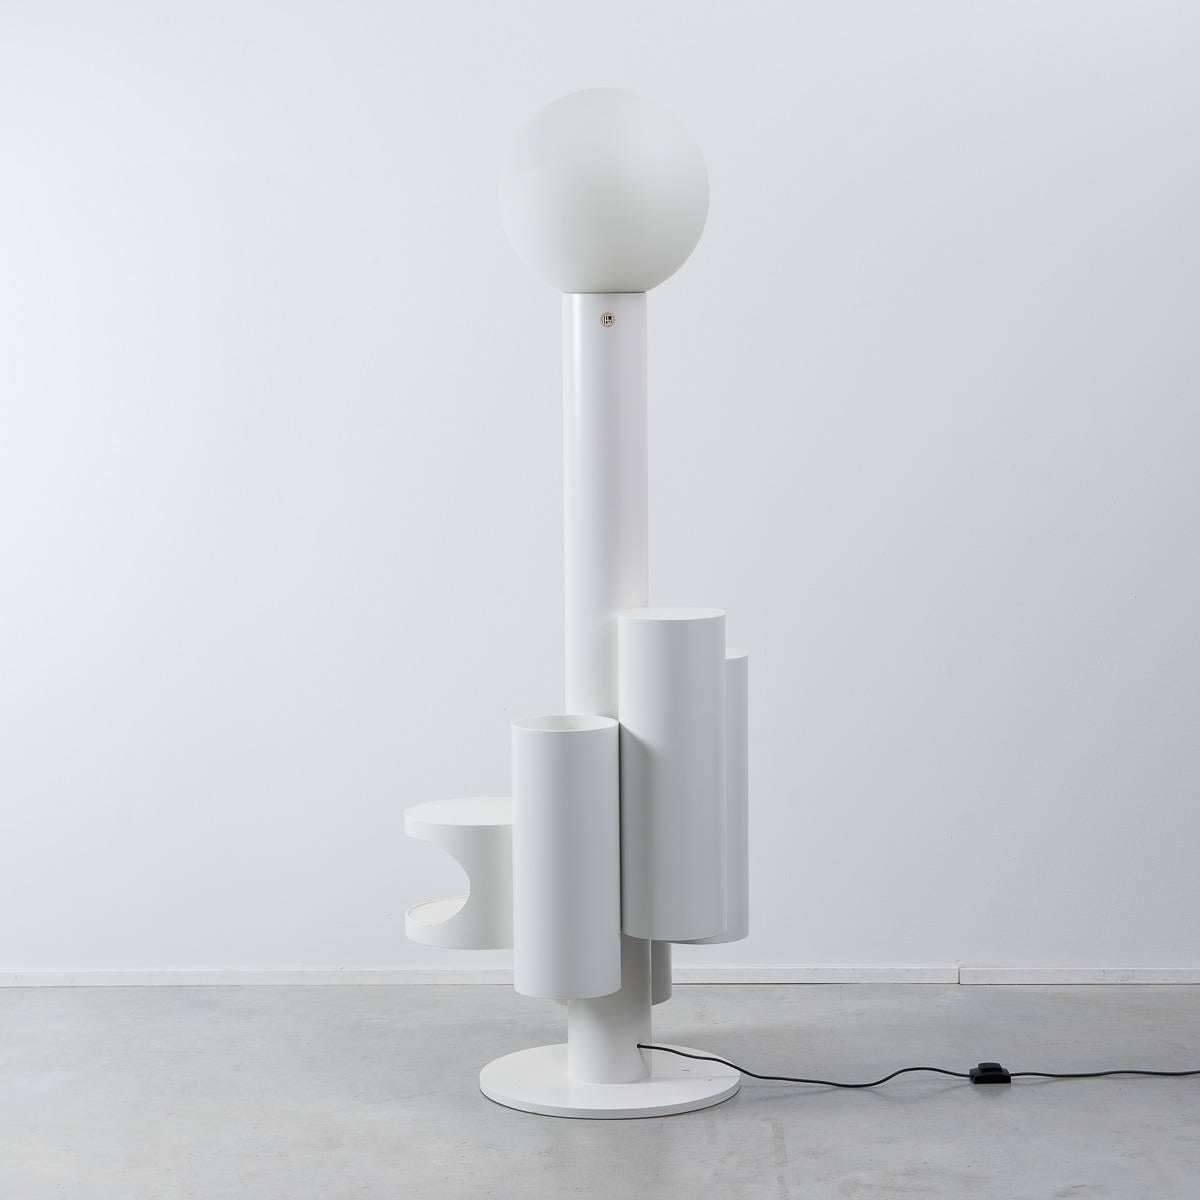 This really cool Bergerscollectie ‘Close encounter’ floor lamp for Kerst Koopman is a real wonder. It’s staggered cylindrical forms are playful yet its muted white lacquer is restrained, creating an interesting futurist object. It comes with